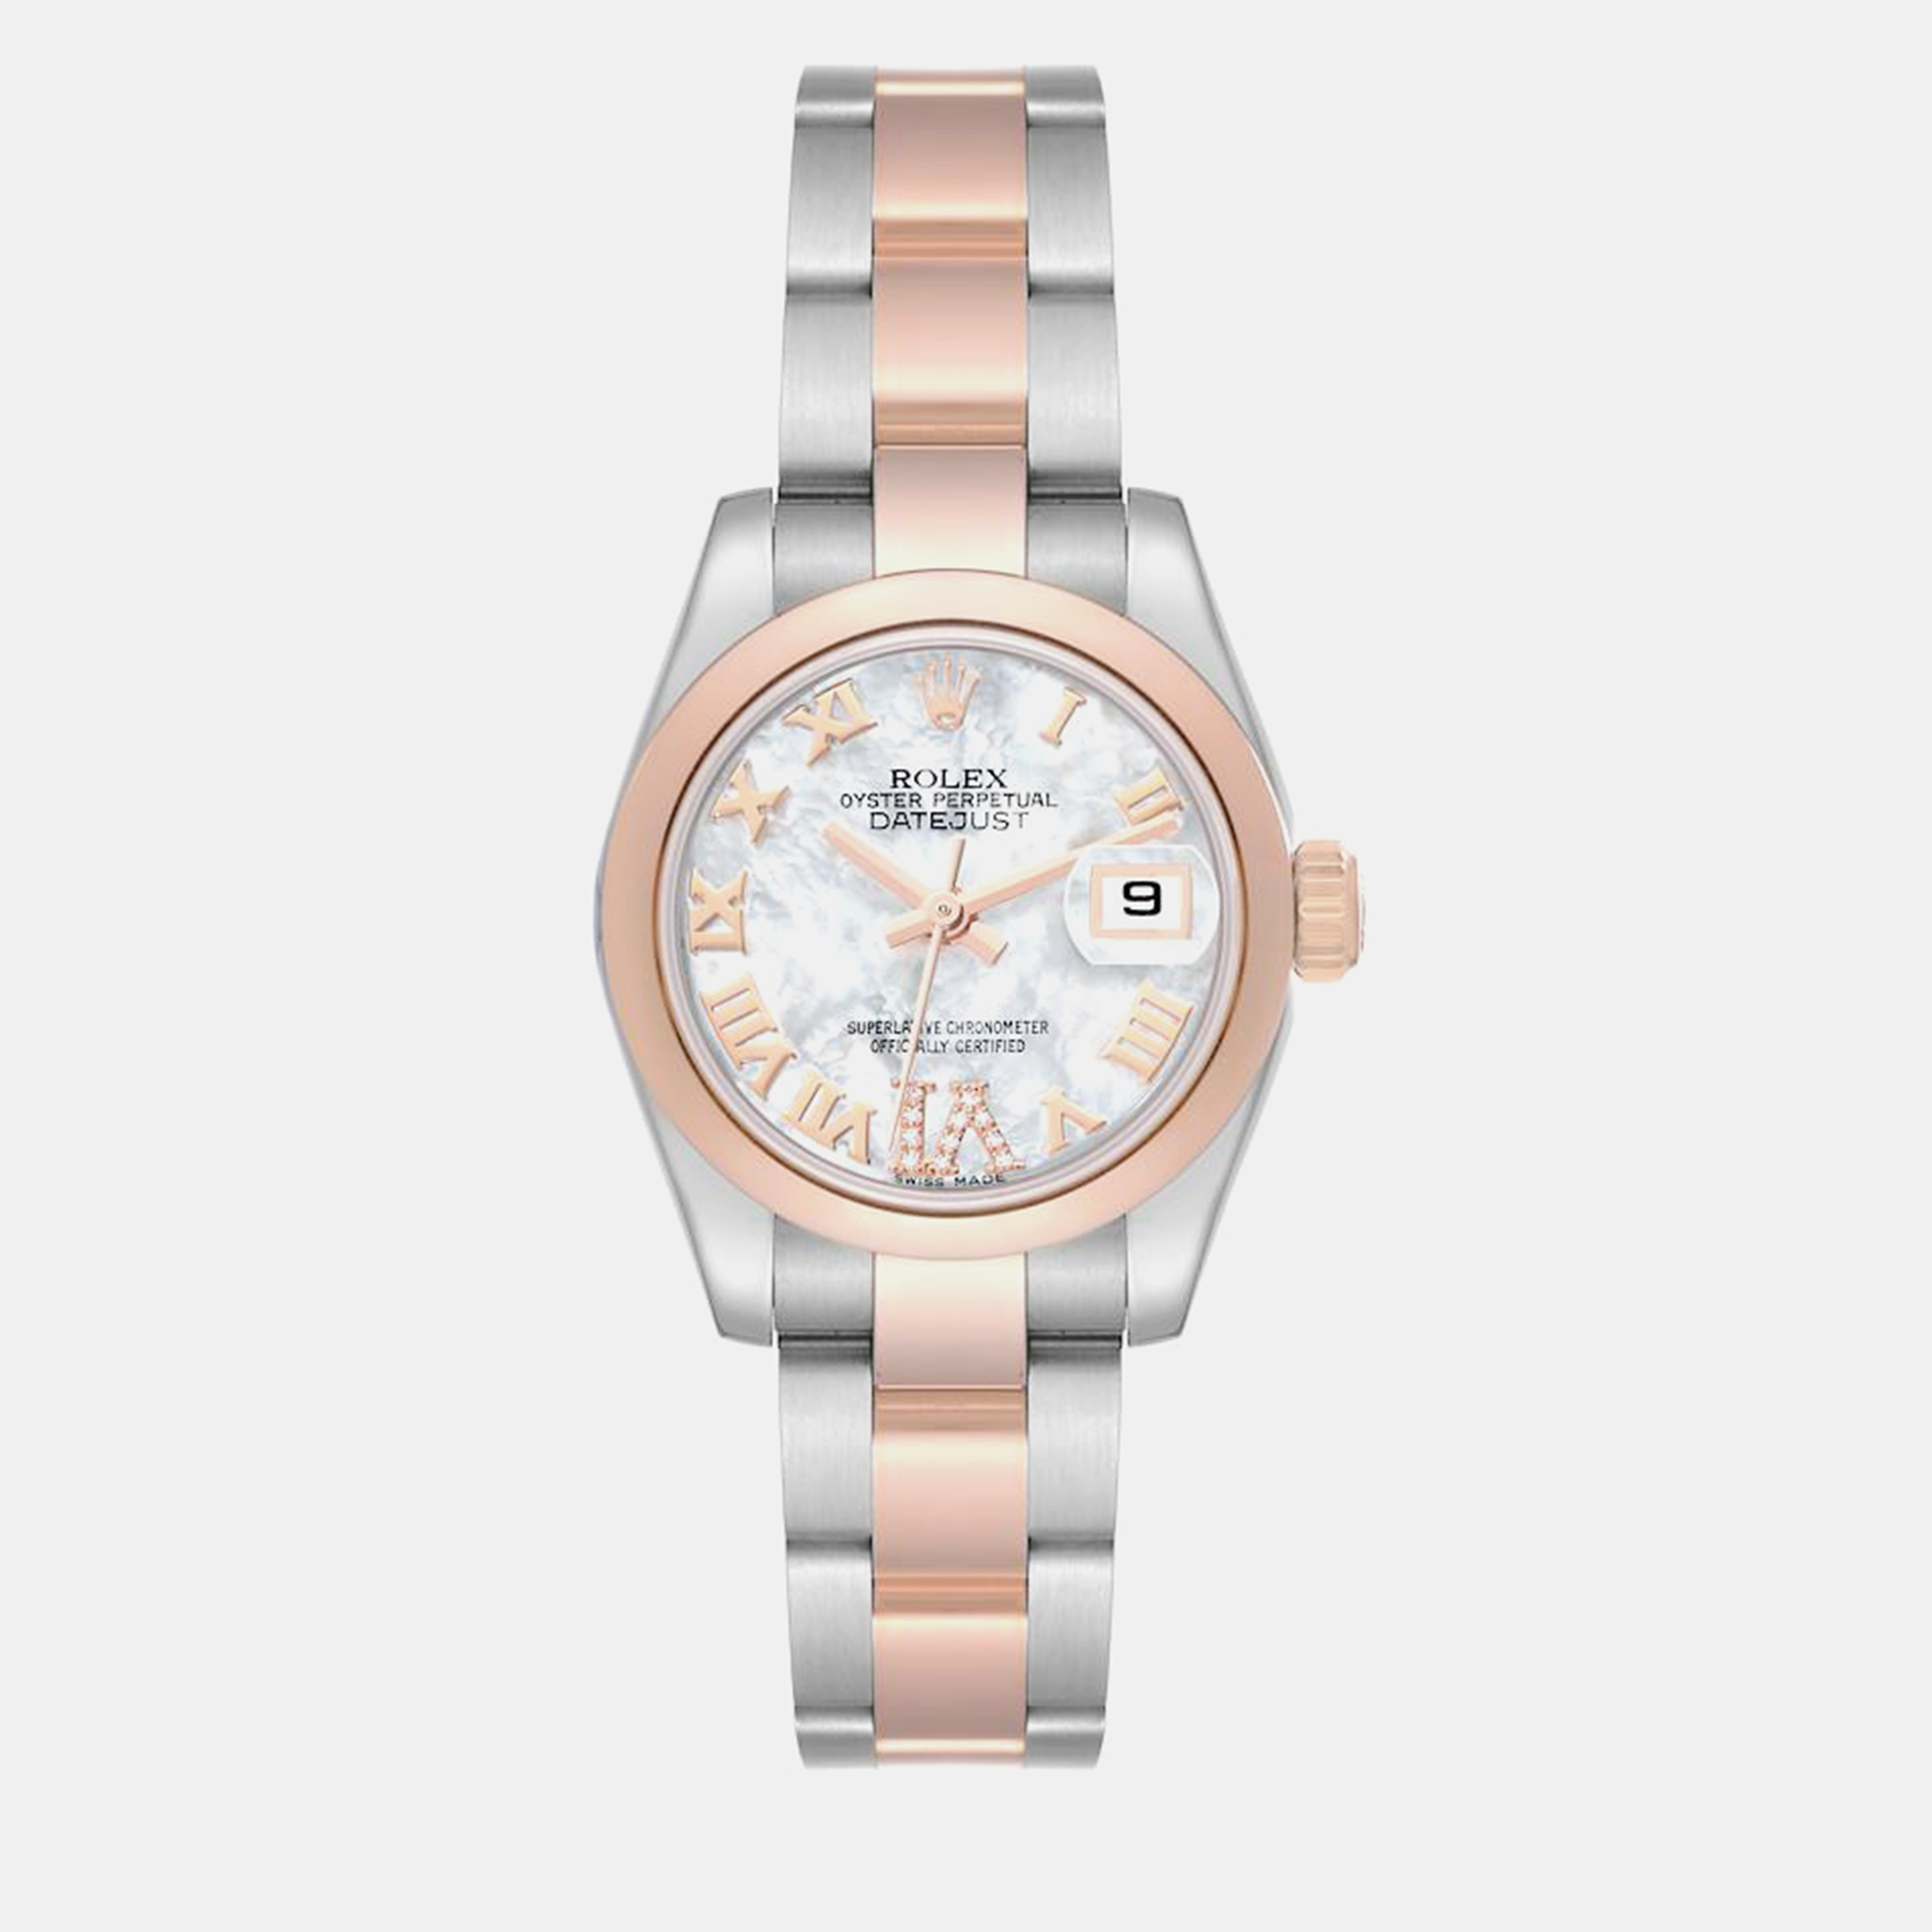 Rolex datejust steel rose gold mother of pearl diamond dial ladies watch 179161 26 mm